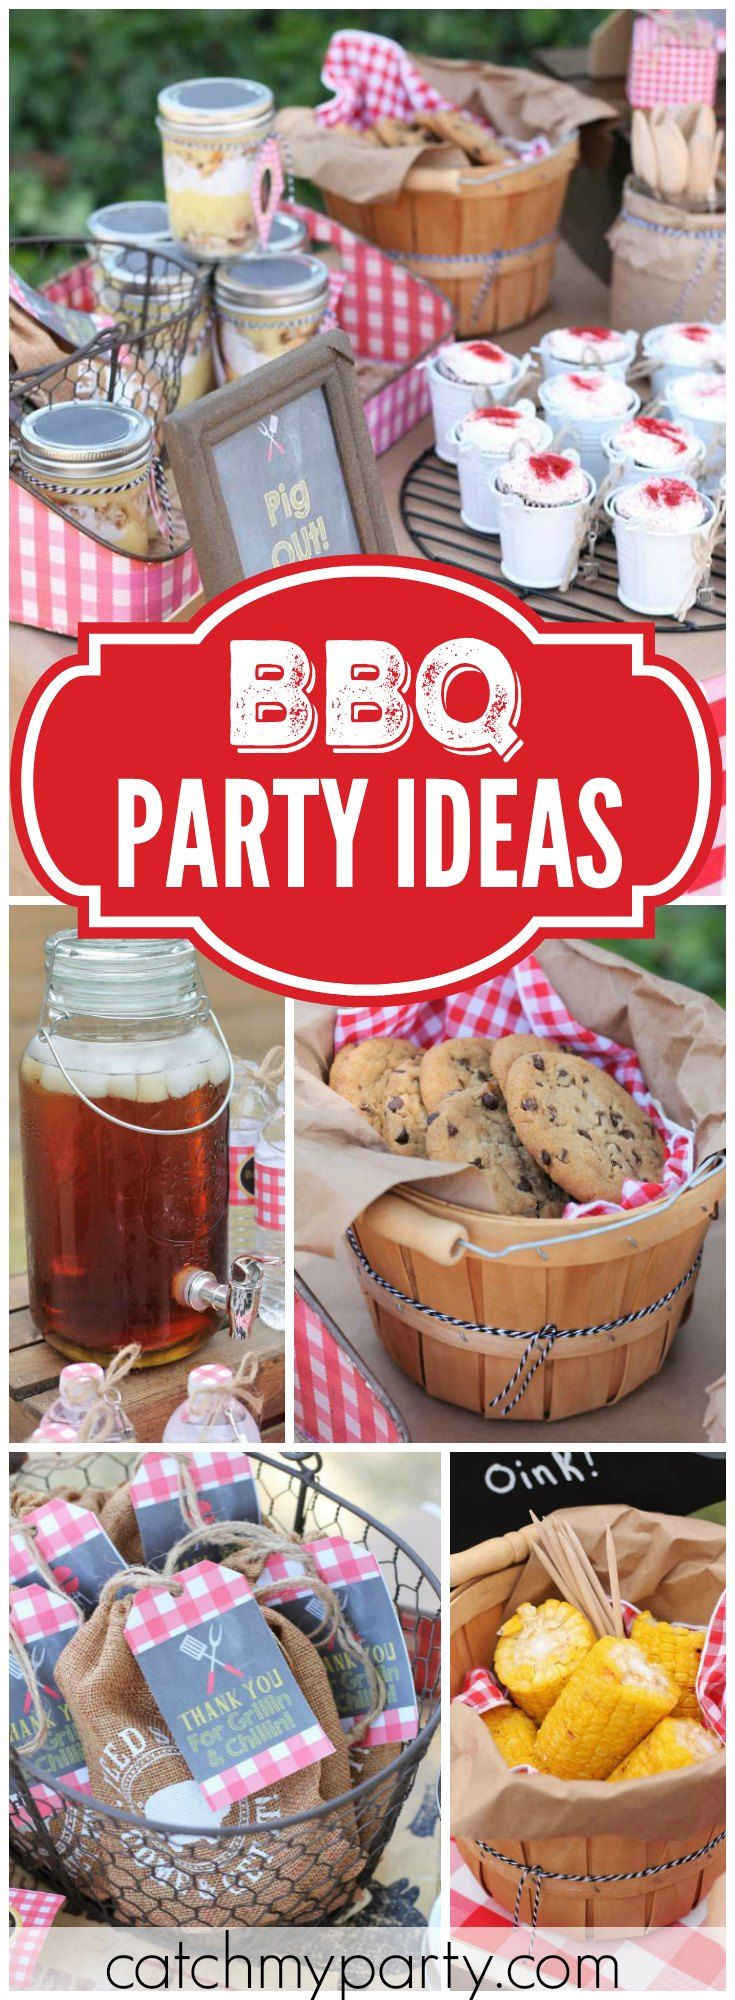 Summer Barbecue Party Ideas
 How great is this patriotic backyard summer BBQ party See